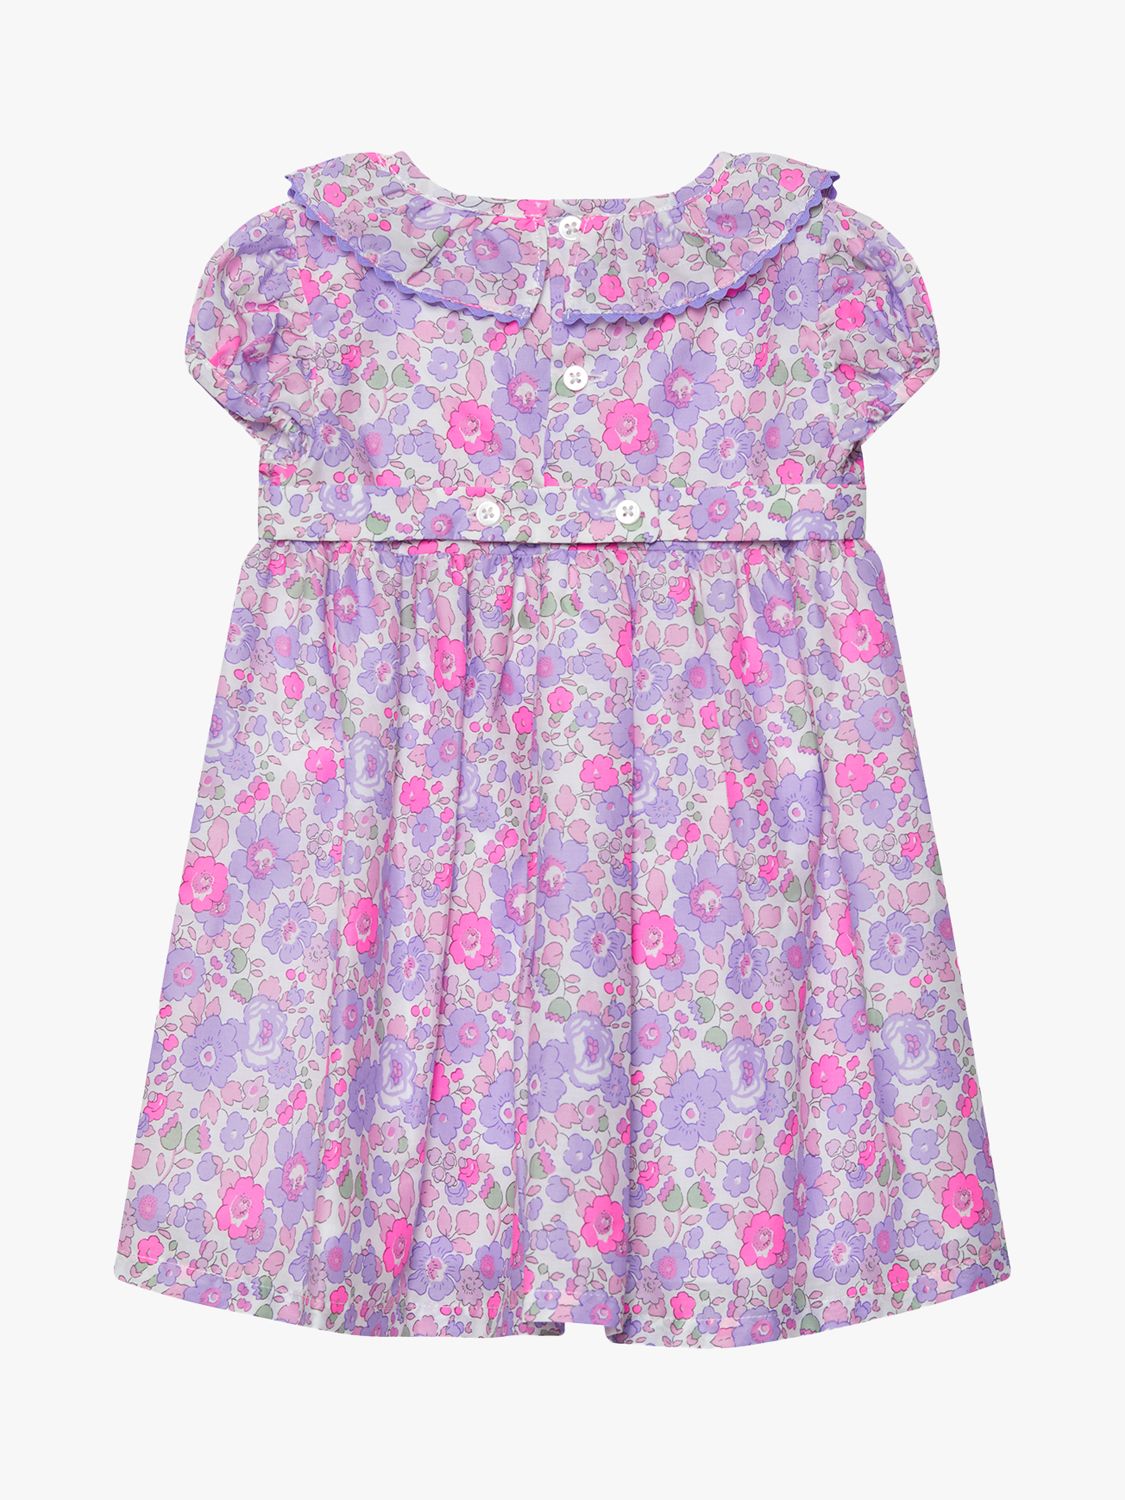 Trotters Baby Betsy Floral Print Dress, Lilac, 3-6 months